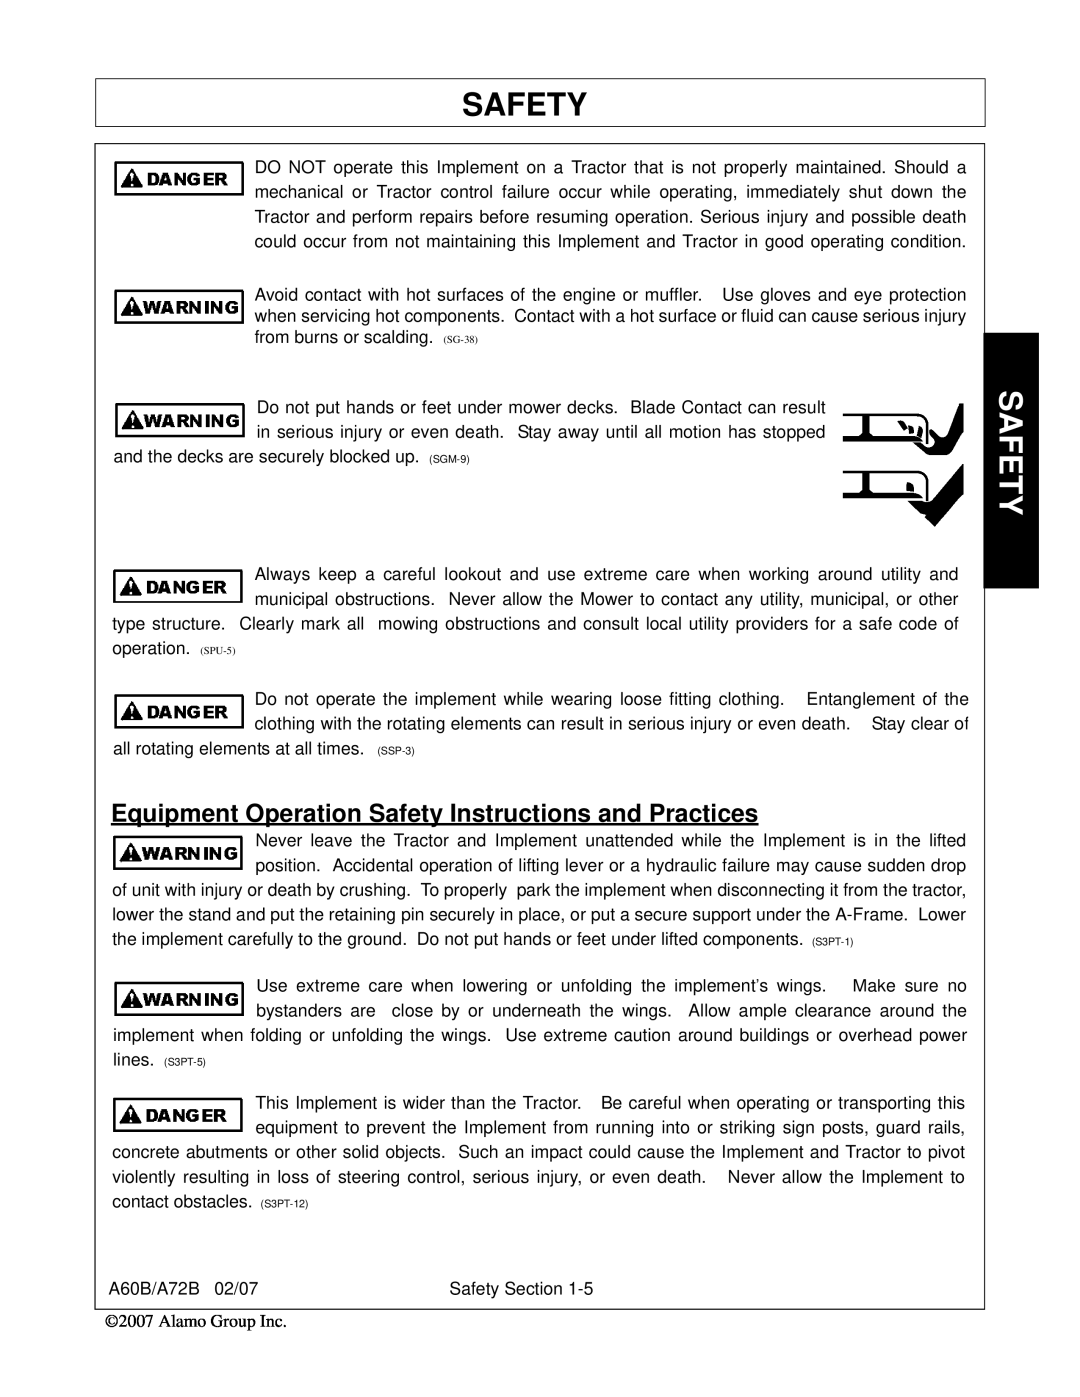 Alamo 00759354C, A60B, A72B manual Equipment Operation Safety Instructions and Practices, lines. S3PT-5 